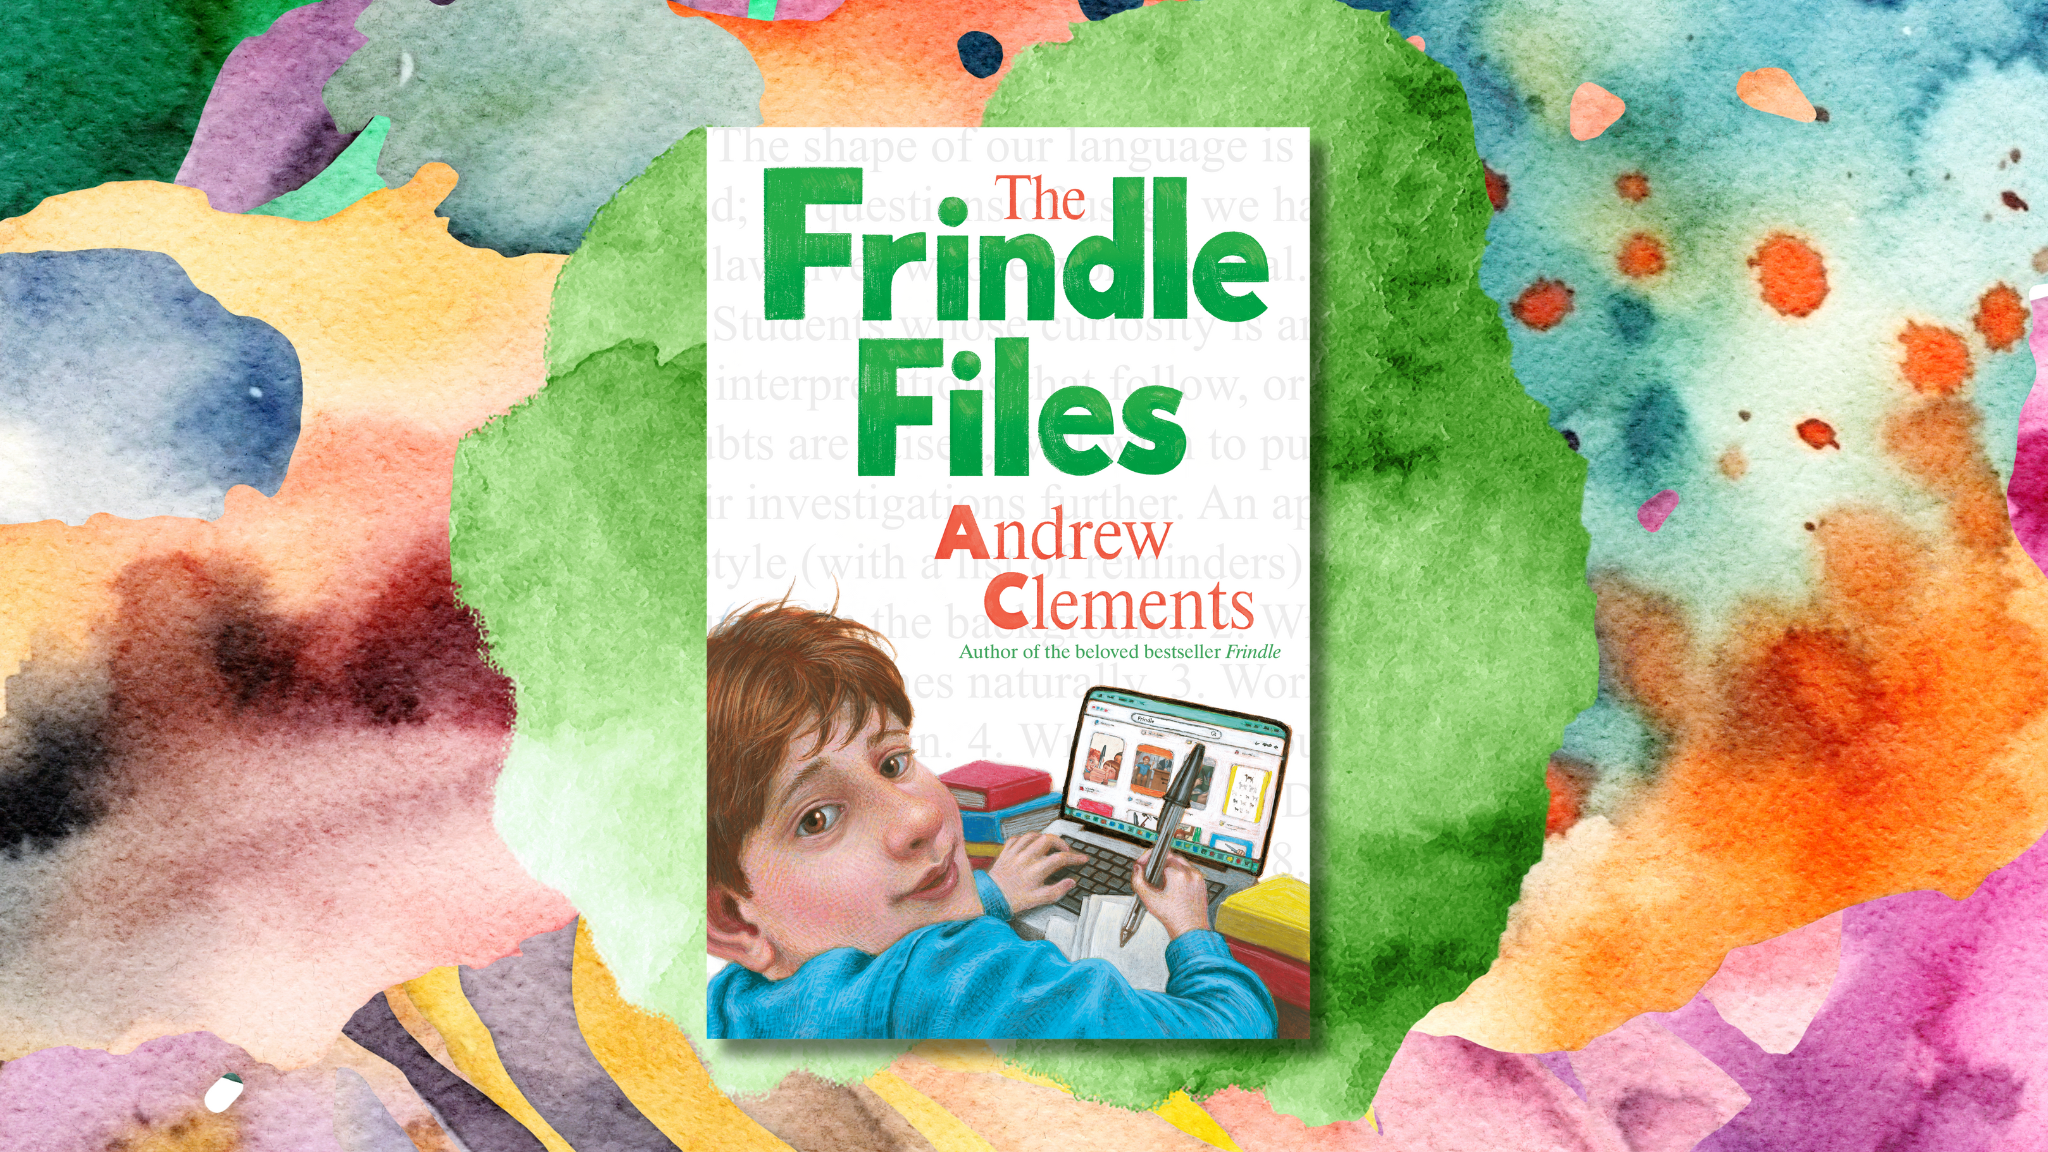 Andrew Clements’ “Frindle” To Receive Posthumous Sequel